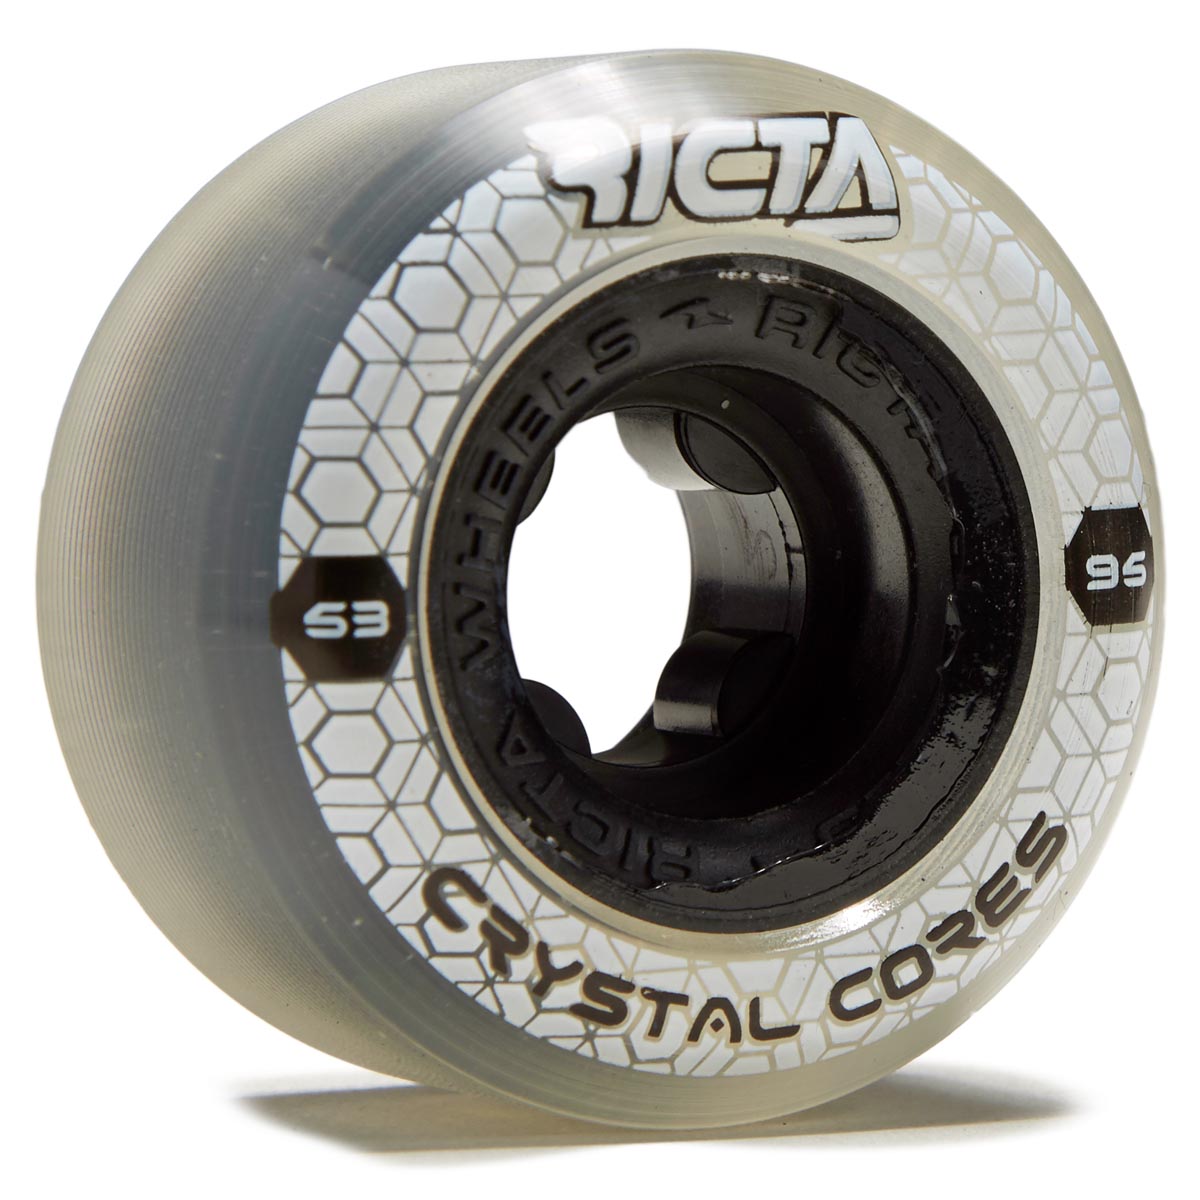 Ricta Crystal Cores Wide 95a Skateboard Wheels - Clear - 53mm image 1